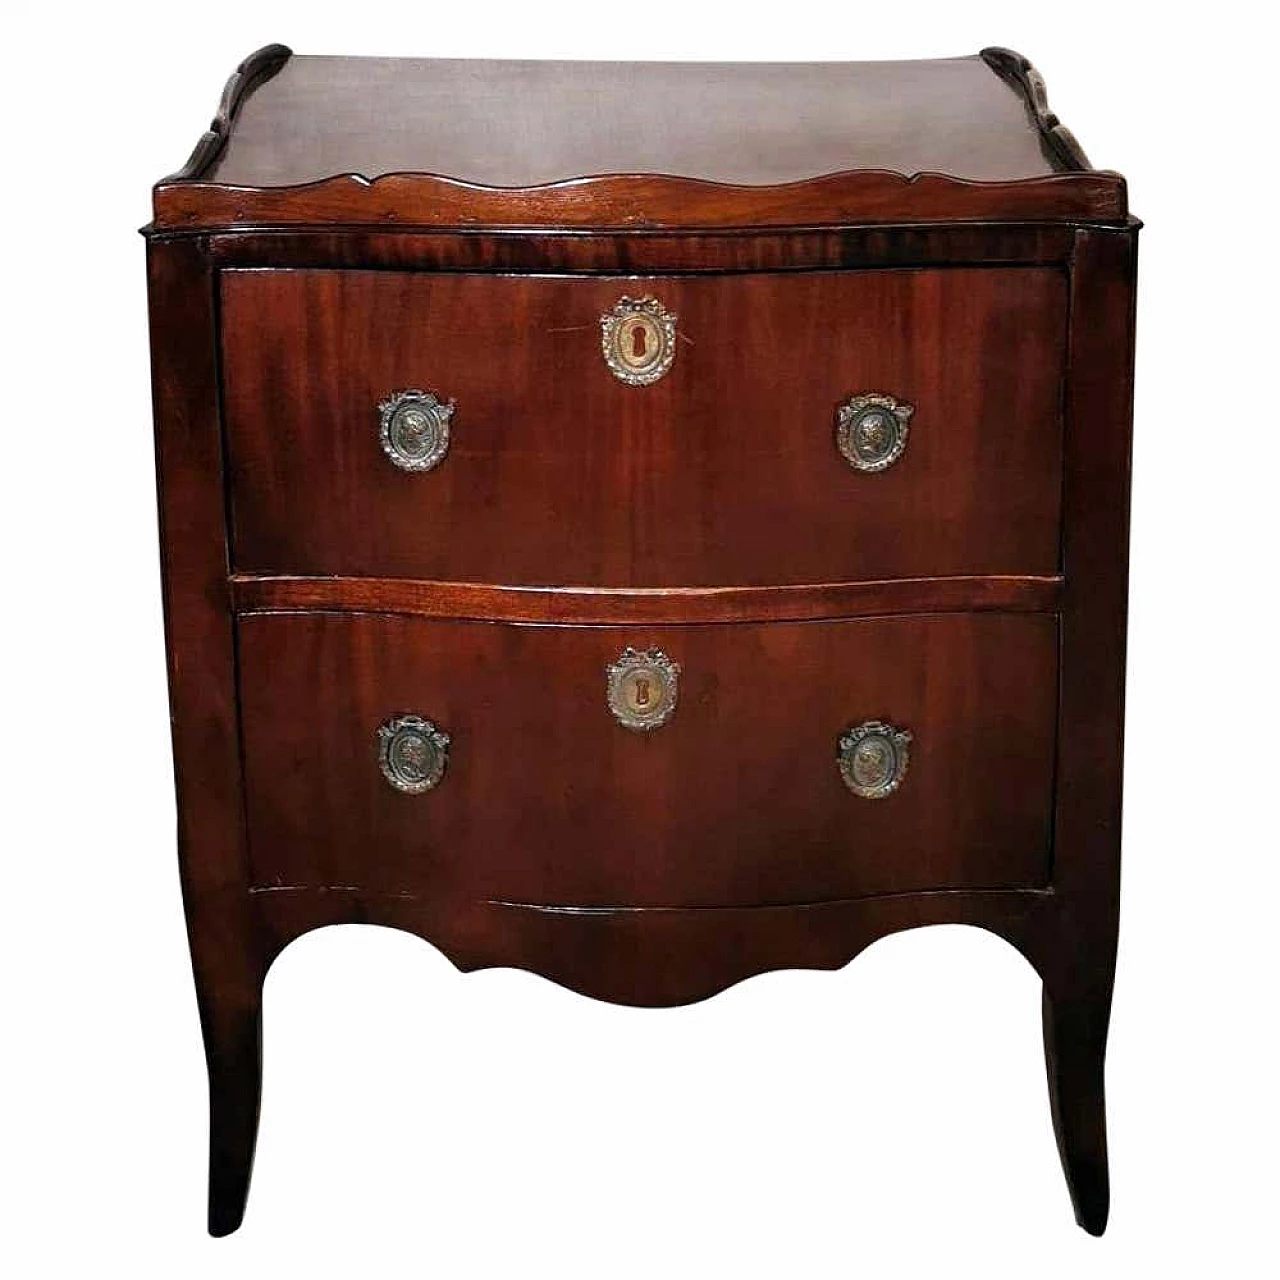 Neoclassical style chest of drawers in mahogany with bronze decorations, 18th century 1332984